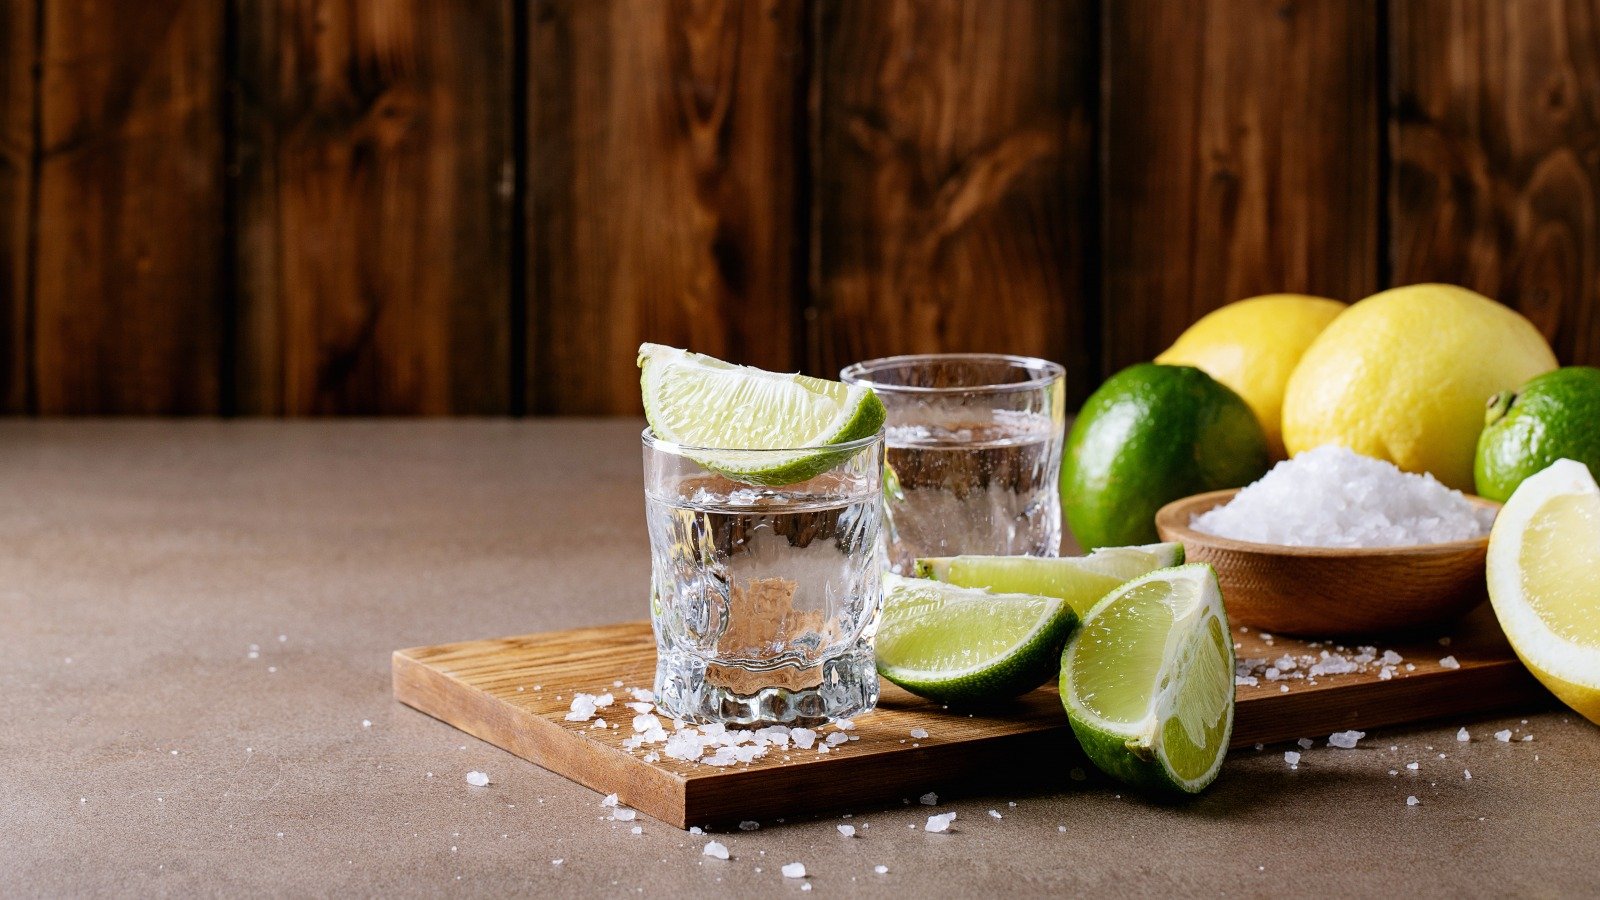 What You Should Know Before Taking Another Sip Of Tequila